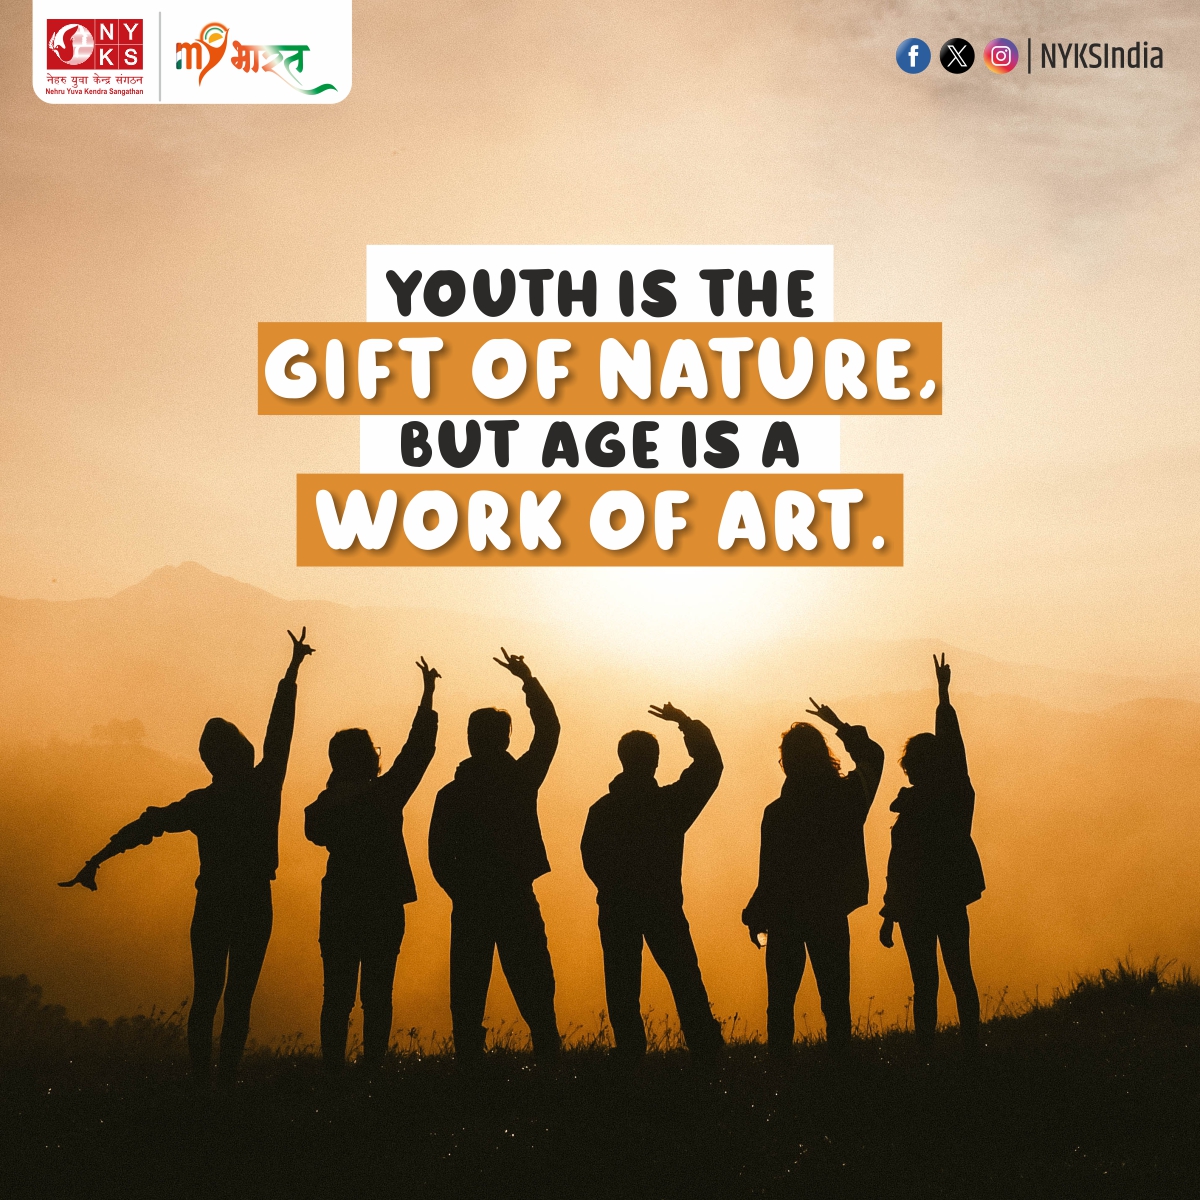 Youth is the canvas painted by nature's hand, but age... age is the masterpiece, crafted through life's journey and experience. 🎨✨ #AgeIsArt #EmbraceYourStory #Youth